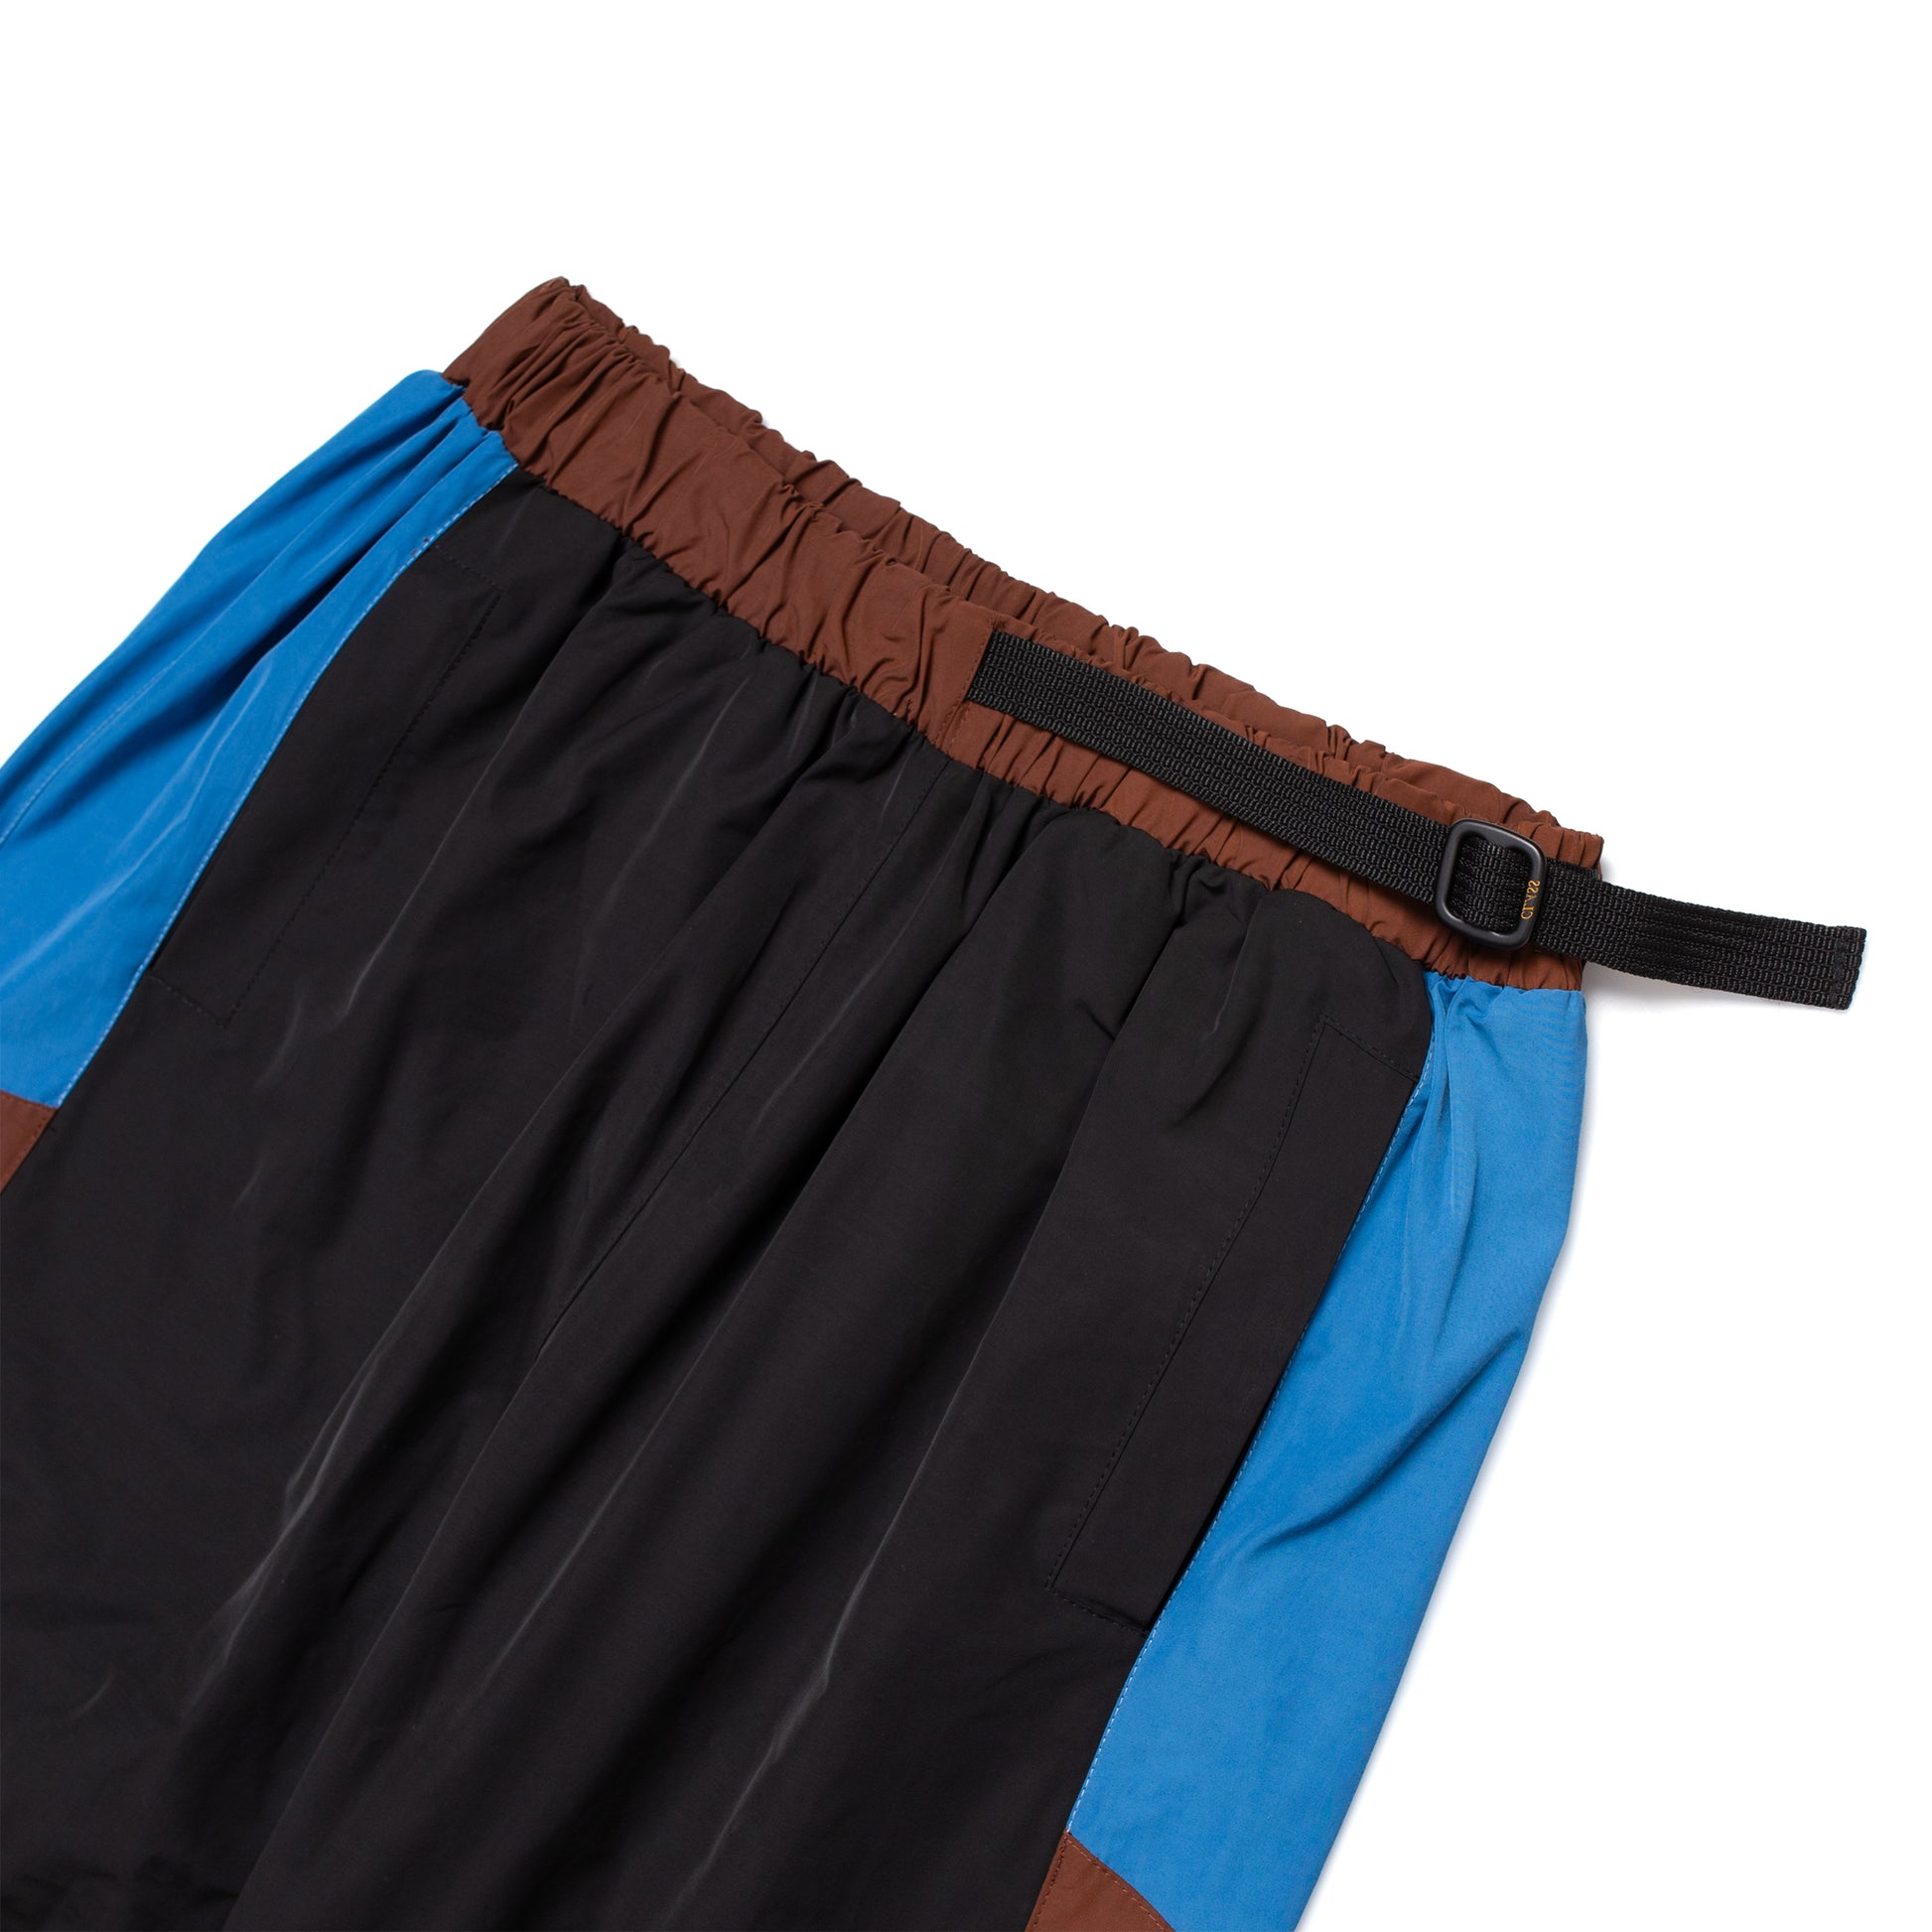 CLASS - Pants Powell "Black&Brown" - THE GAME